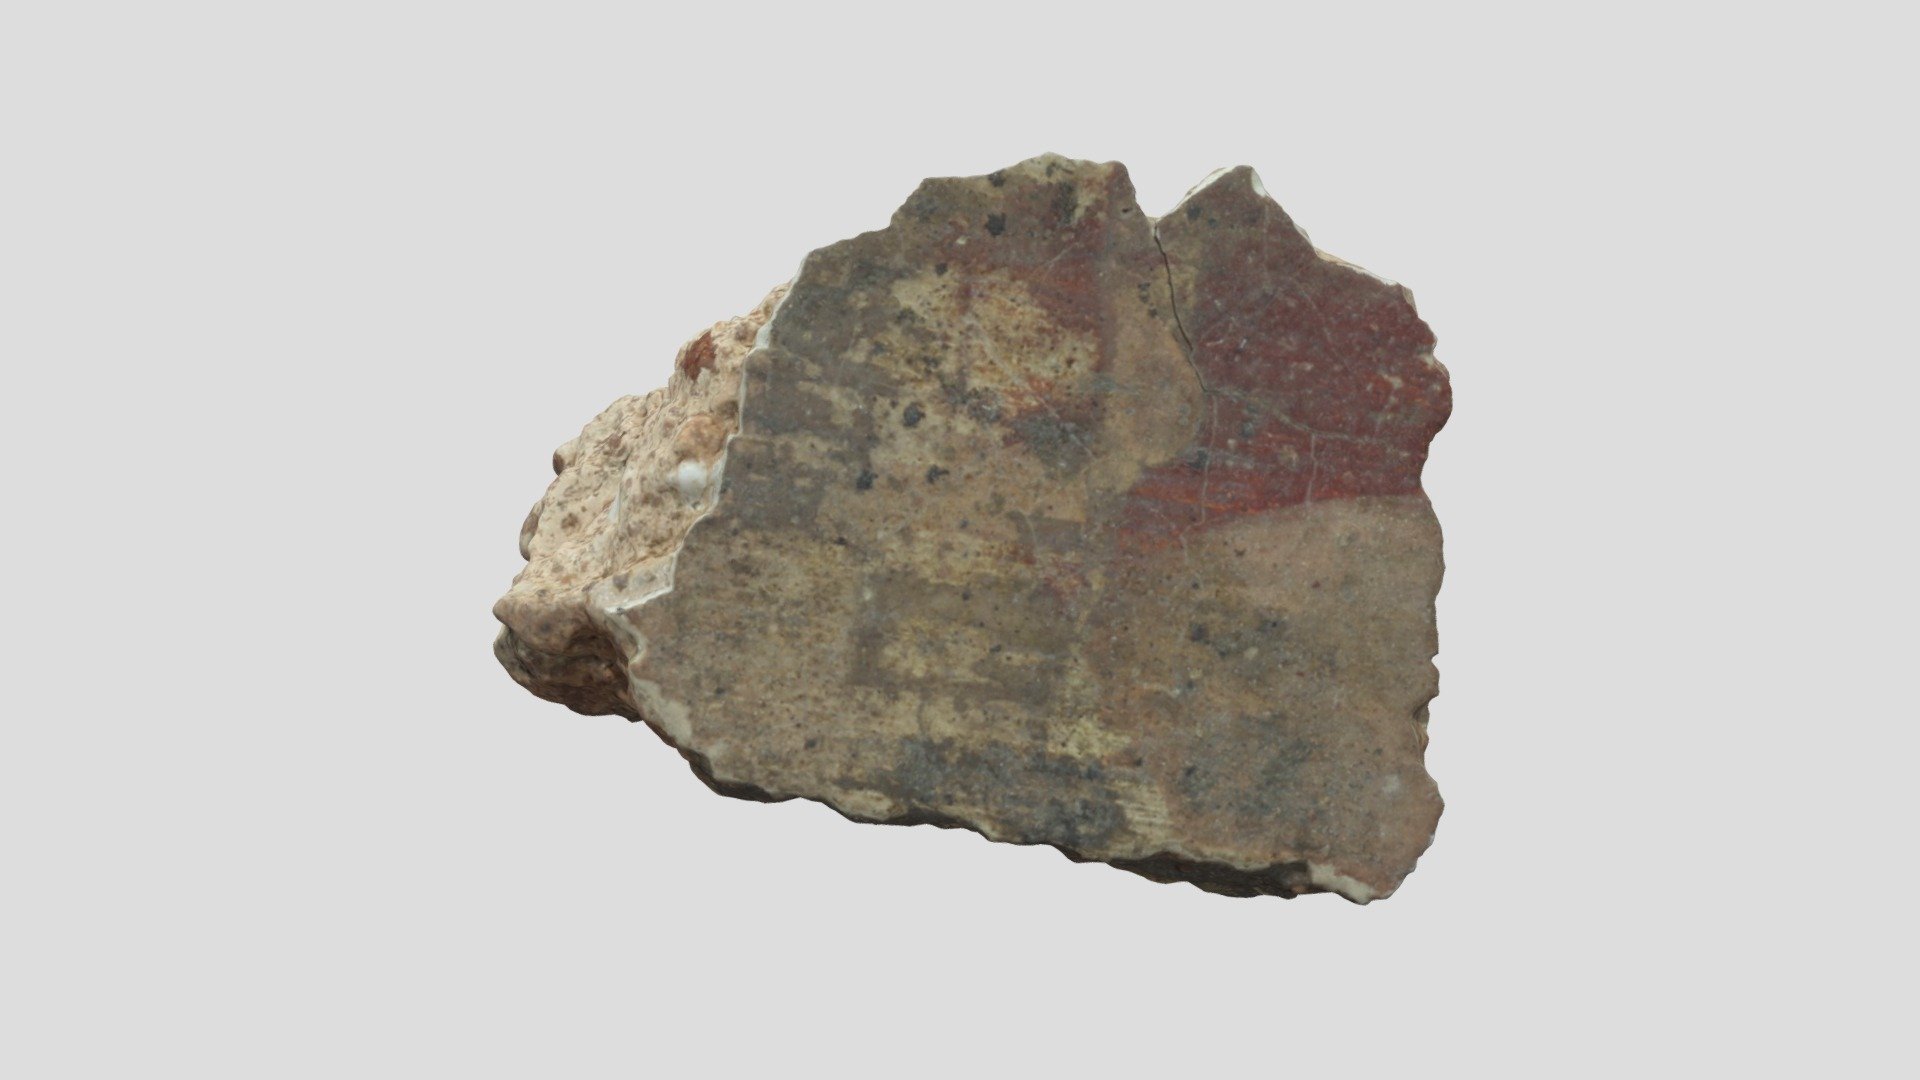 Everyday life in Pontes, Roman Staines; a piece of painted wall plaster. Some people in Roman Staines did rather well out of selling provisions to passing travellers; their houses had tiled roofs, Opus Signinum (concrete) floors, hypocaust flue tiles (under floor heating), window glass and painted walls. This is one of many fragments of painted wall plaster found in Staines. 

If you look carefully you can see a groove on the back where the slaked lime/sand/aggregate plaster was attached to the wooden ‘wattle’ frame of the wall, and a thin fine smooth layer of crushed marble which is applied to the outer surface to provide a painting surface. Analysis of samples from Staines by the University of Leicester showed our painted plaster to be painted ‘buon fresco’, or when the plaster was still wet, meaning plastering and painting were completed in panels of one days work before the plaster dried.

This fragment is ca. 2cm across and photography employed a 50mm lens at F22 3d model